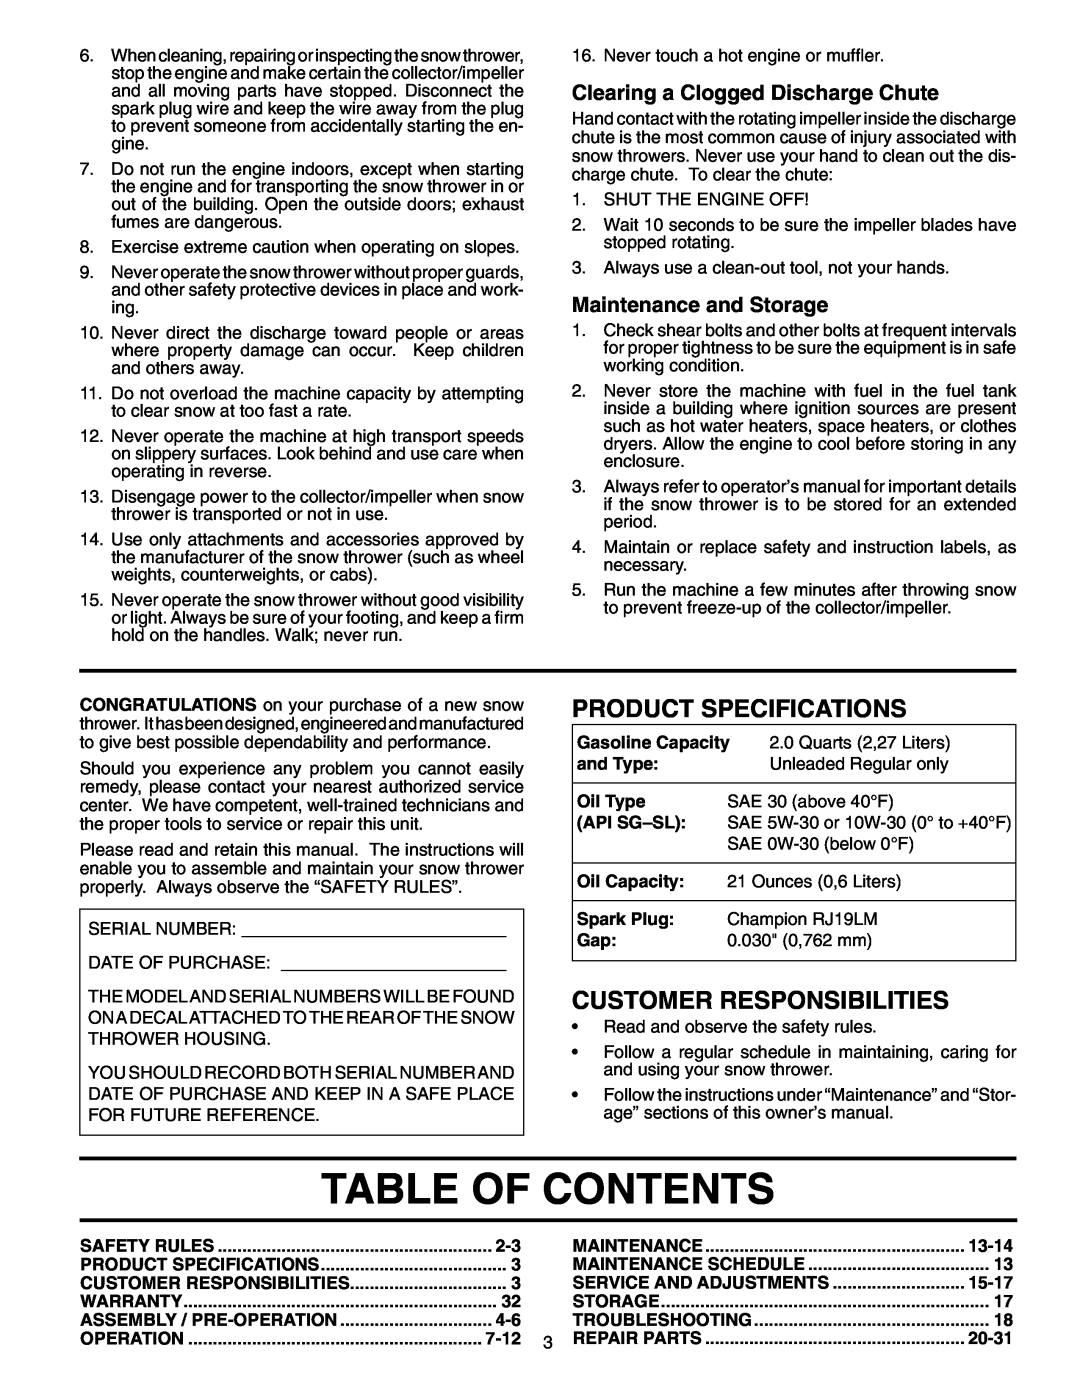 Poulan PO5524 Table Of Contents, Clearing a Clogged Discharge Chute, Maintenance and Storage, Product Specifications, 7-12 